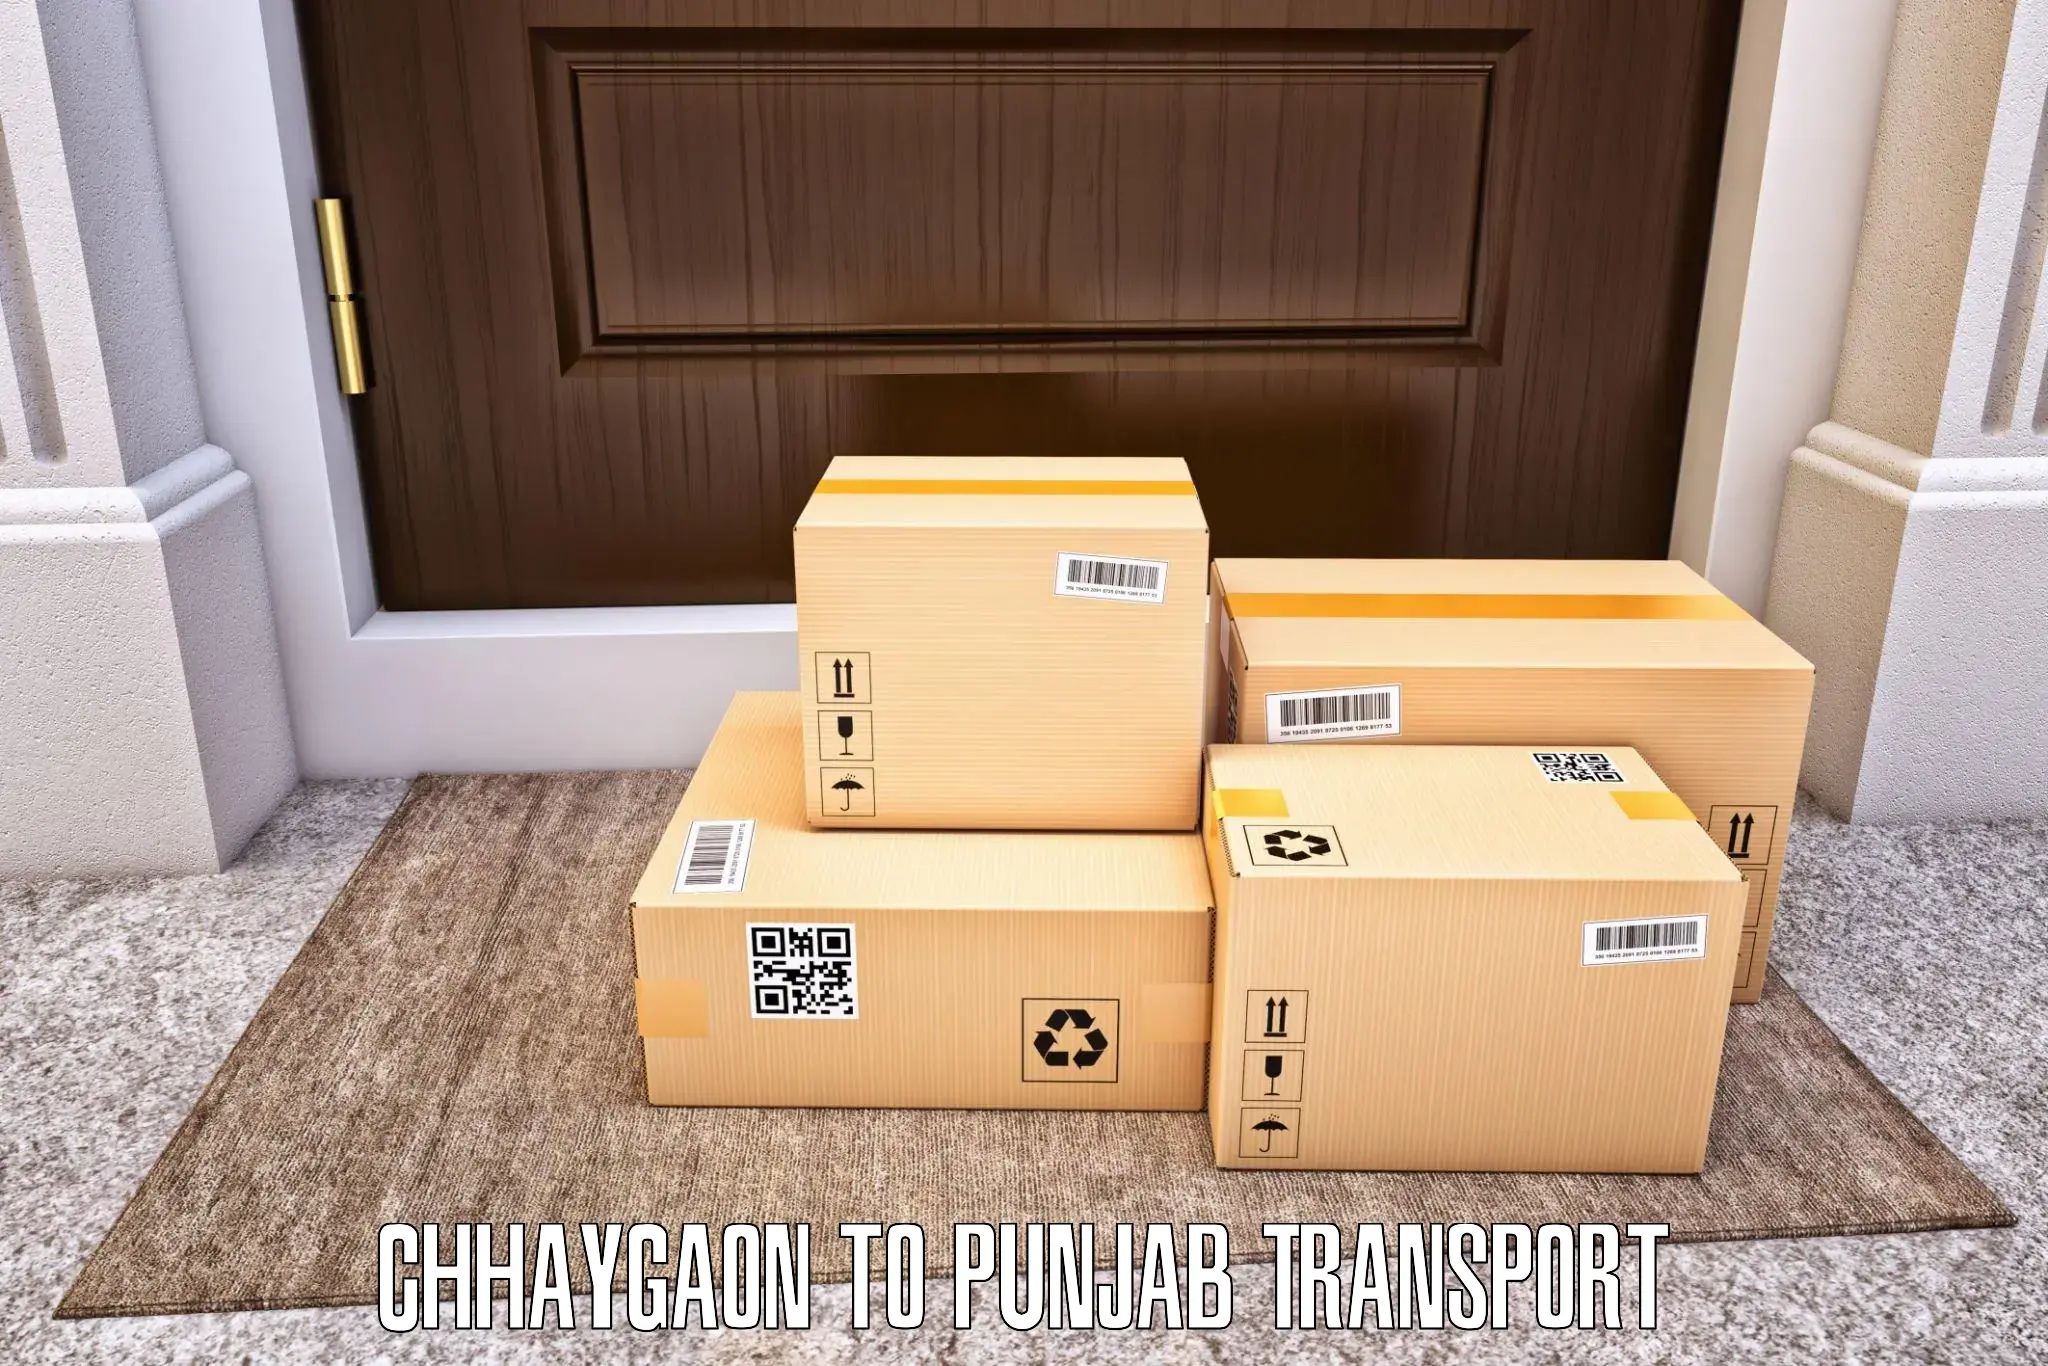 Lorry transport service Chhaygaon to Begowal